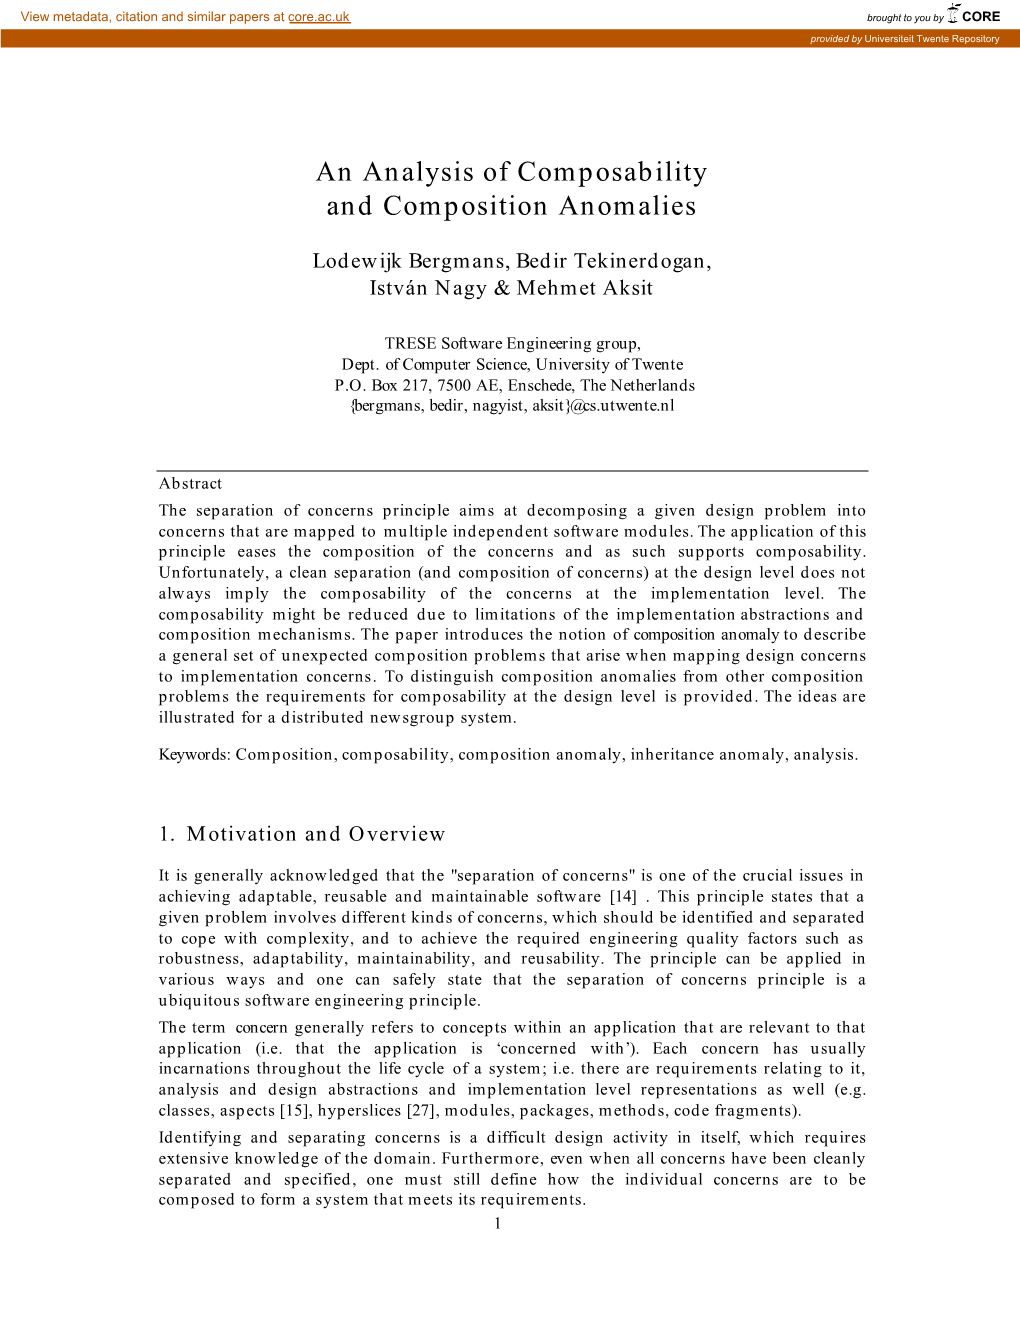 An Analysis of Composability and Composition Anomalies